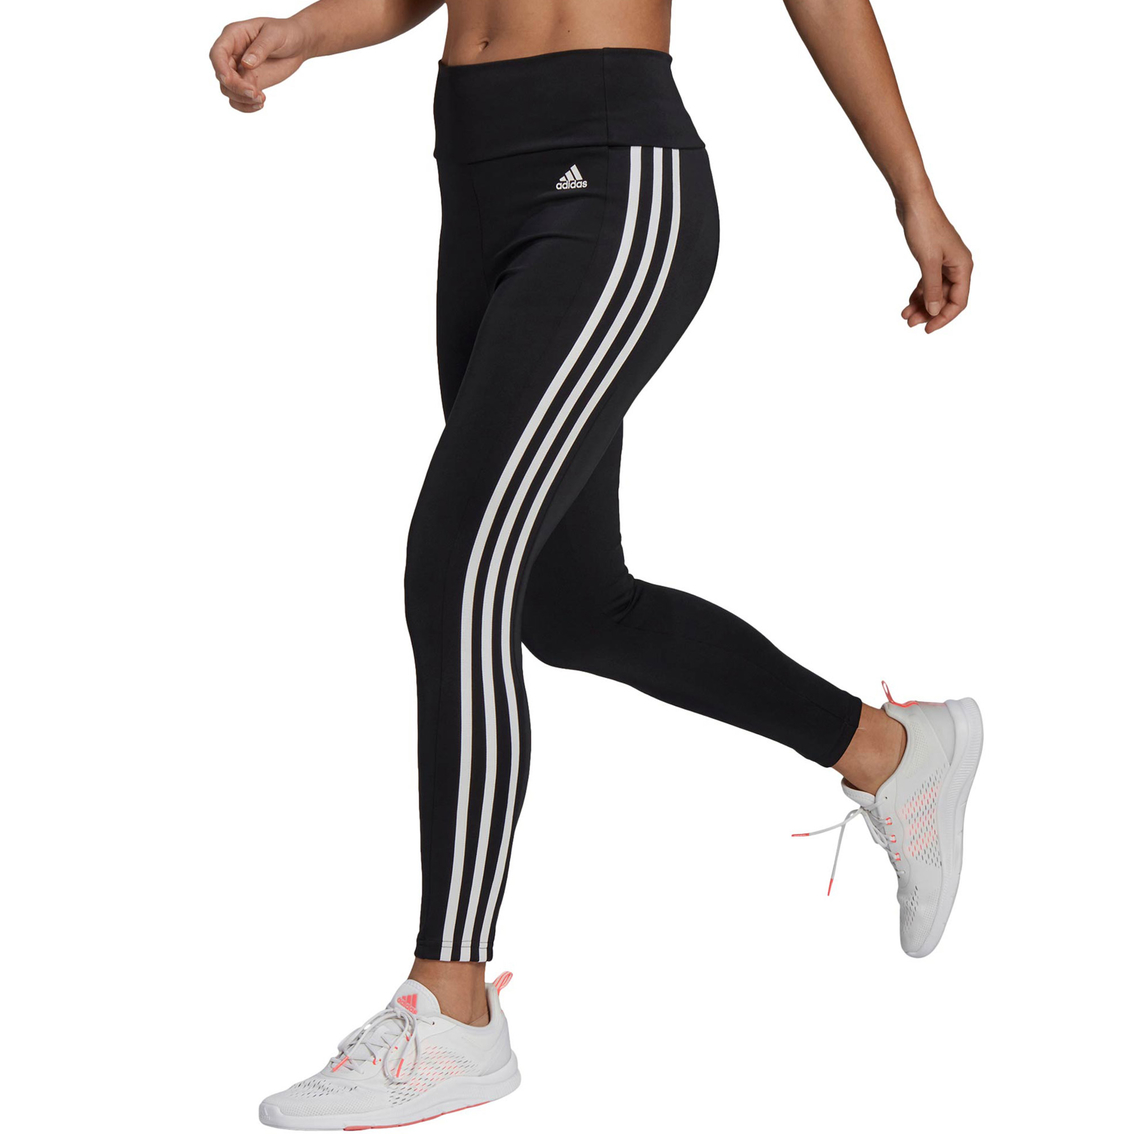 adidas Essential 3 Stripes 7/8 Tights - Image 3 of 5